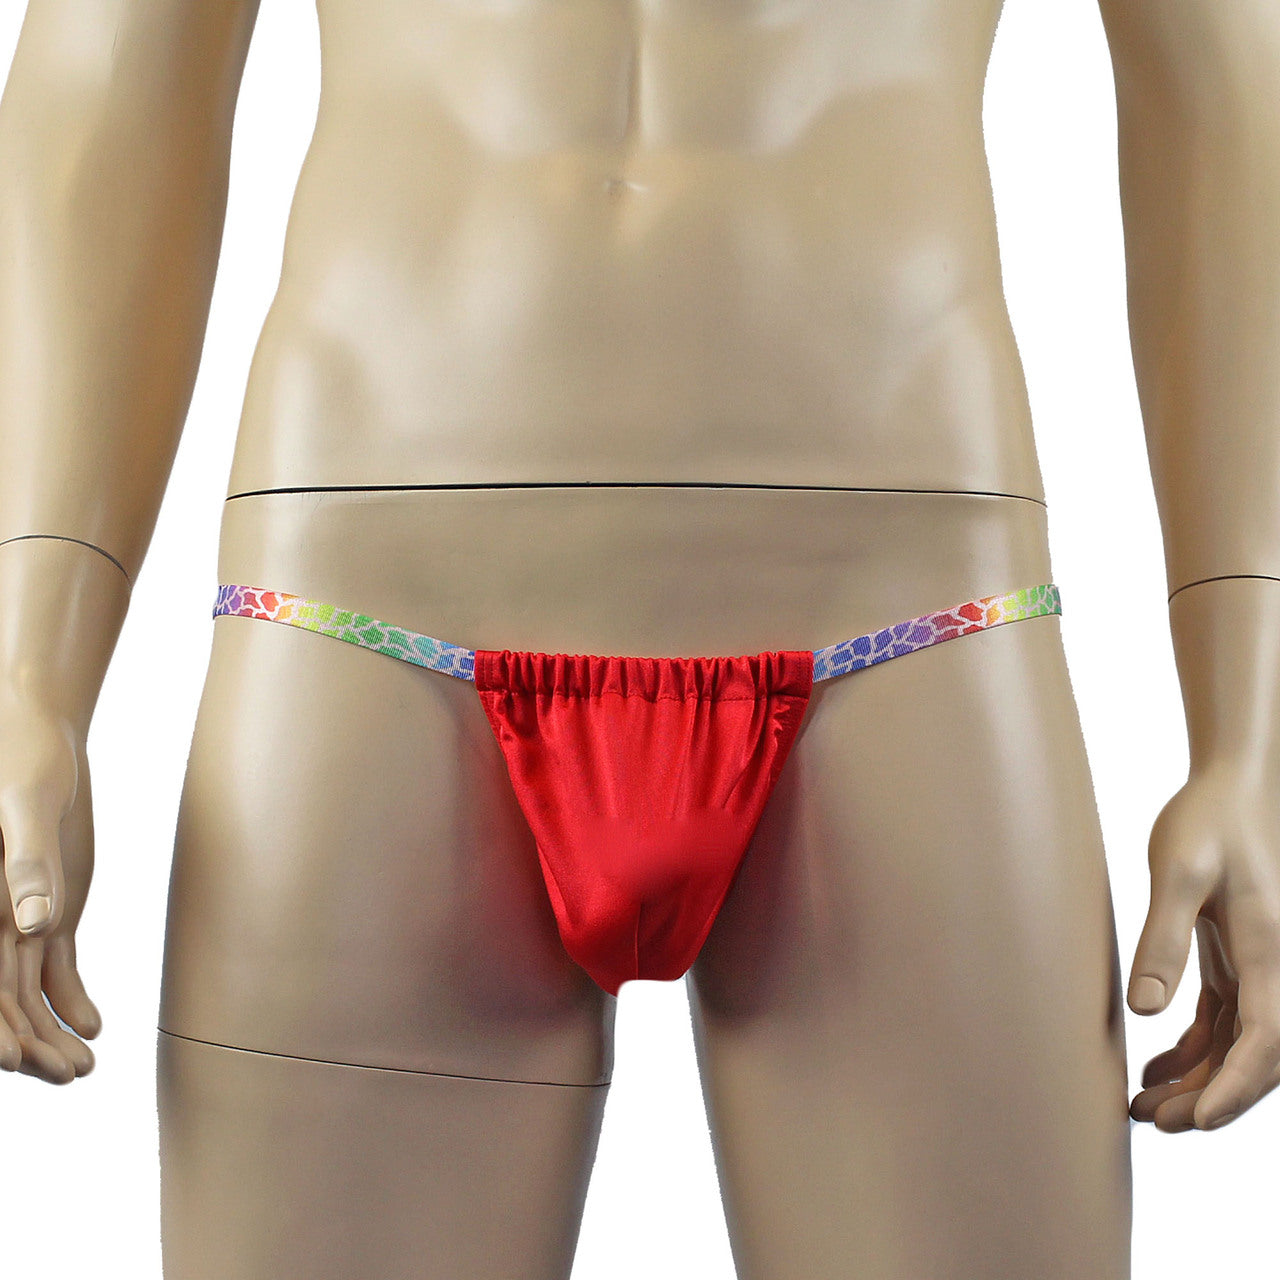 Mens Wild Colourful Adjustable Ball Bag Pouch G string Underwear (red plus other colours)